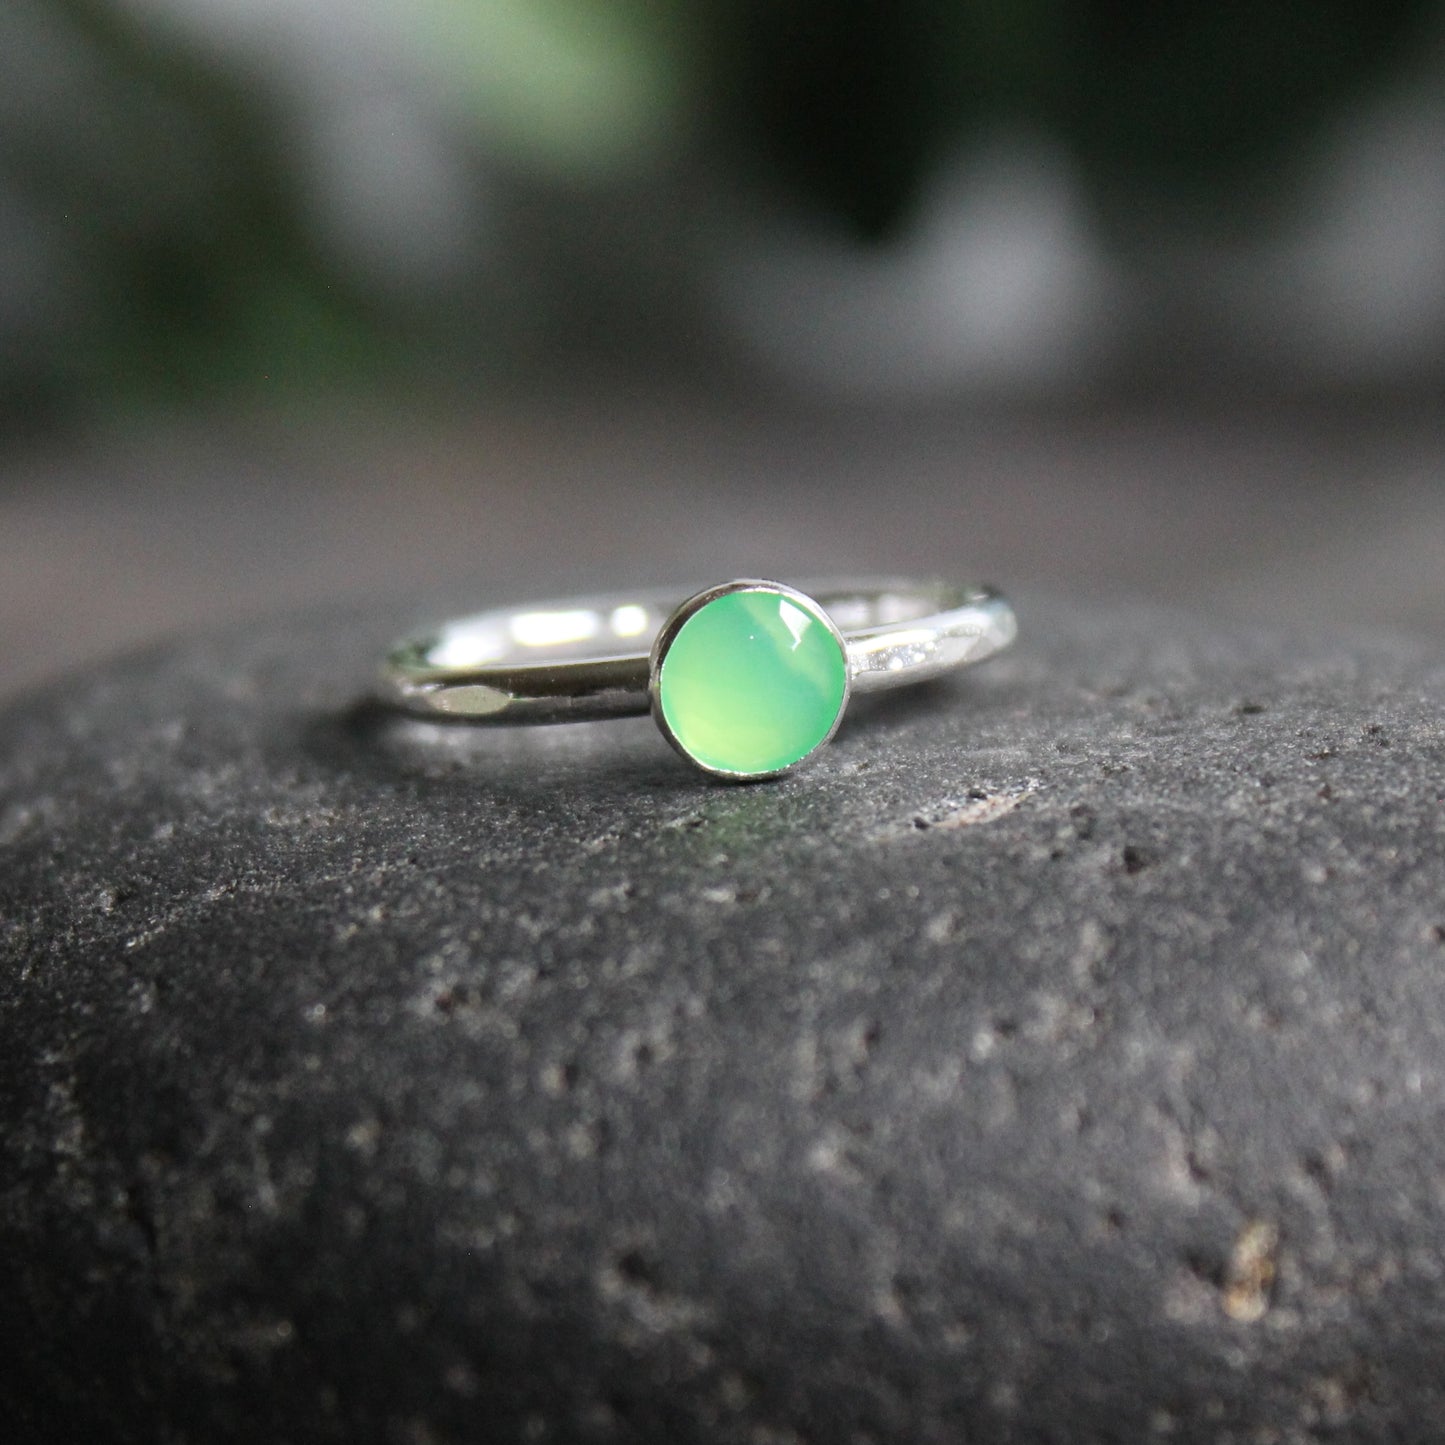 A 6mm rose cut round chrysoprase cabochon set in a sterling silver bezel setting on a sturdy silver band. 